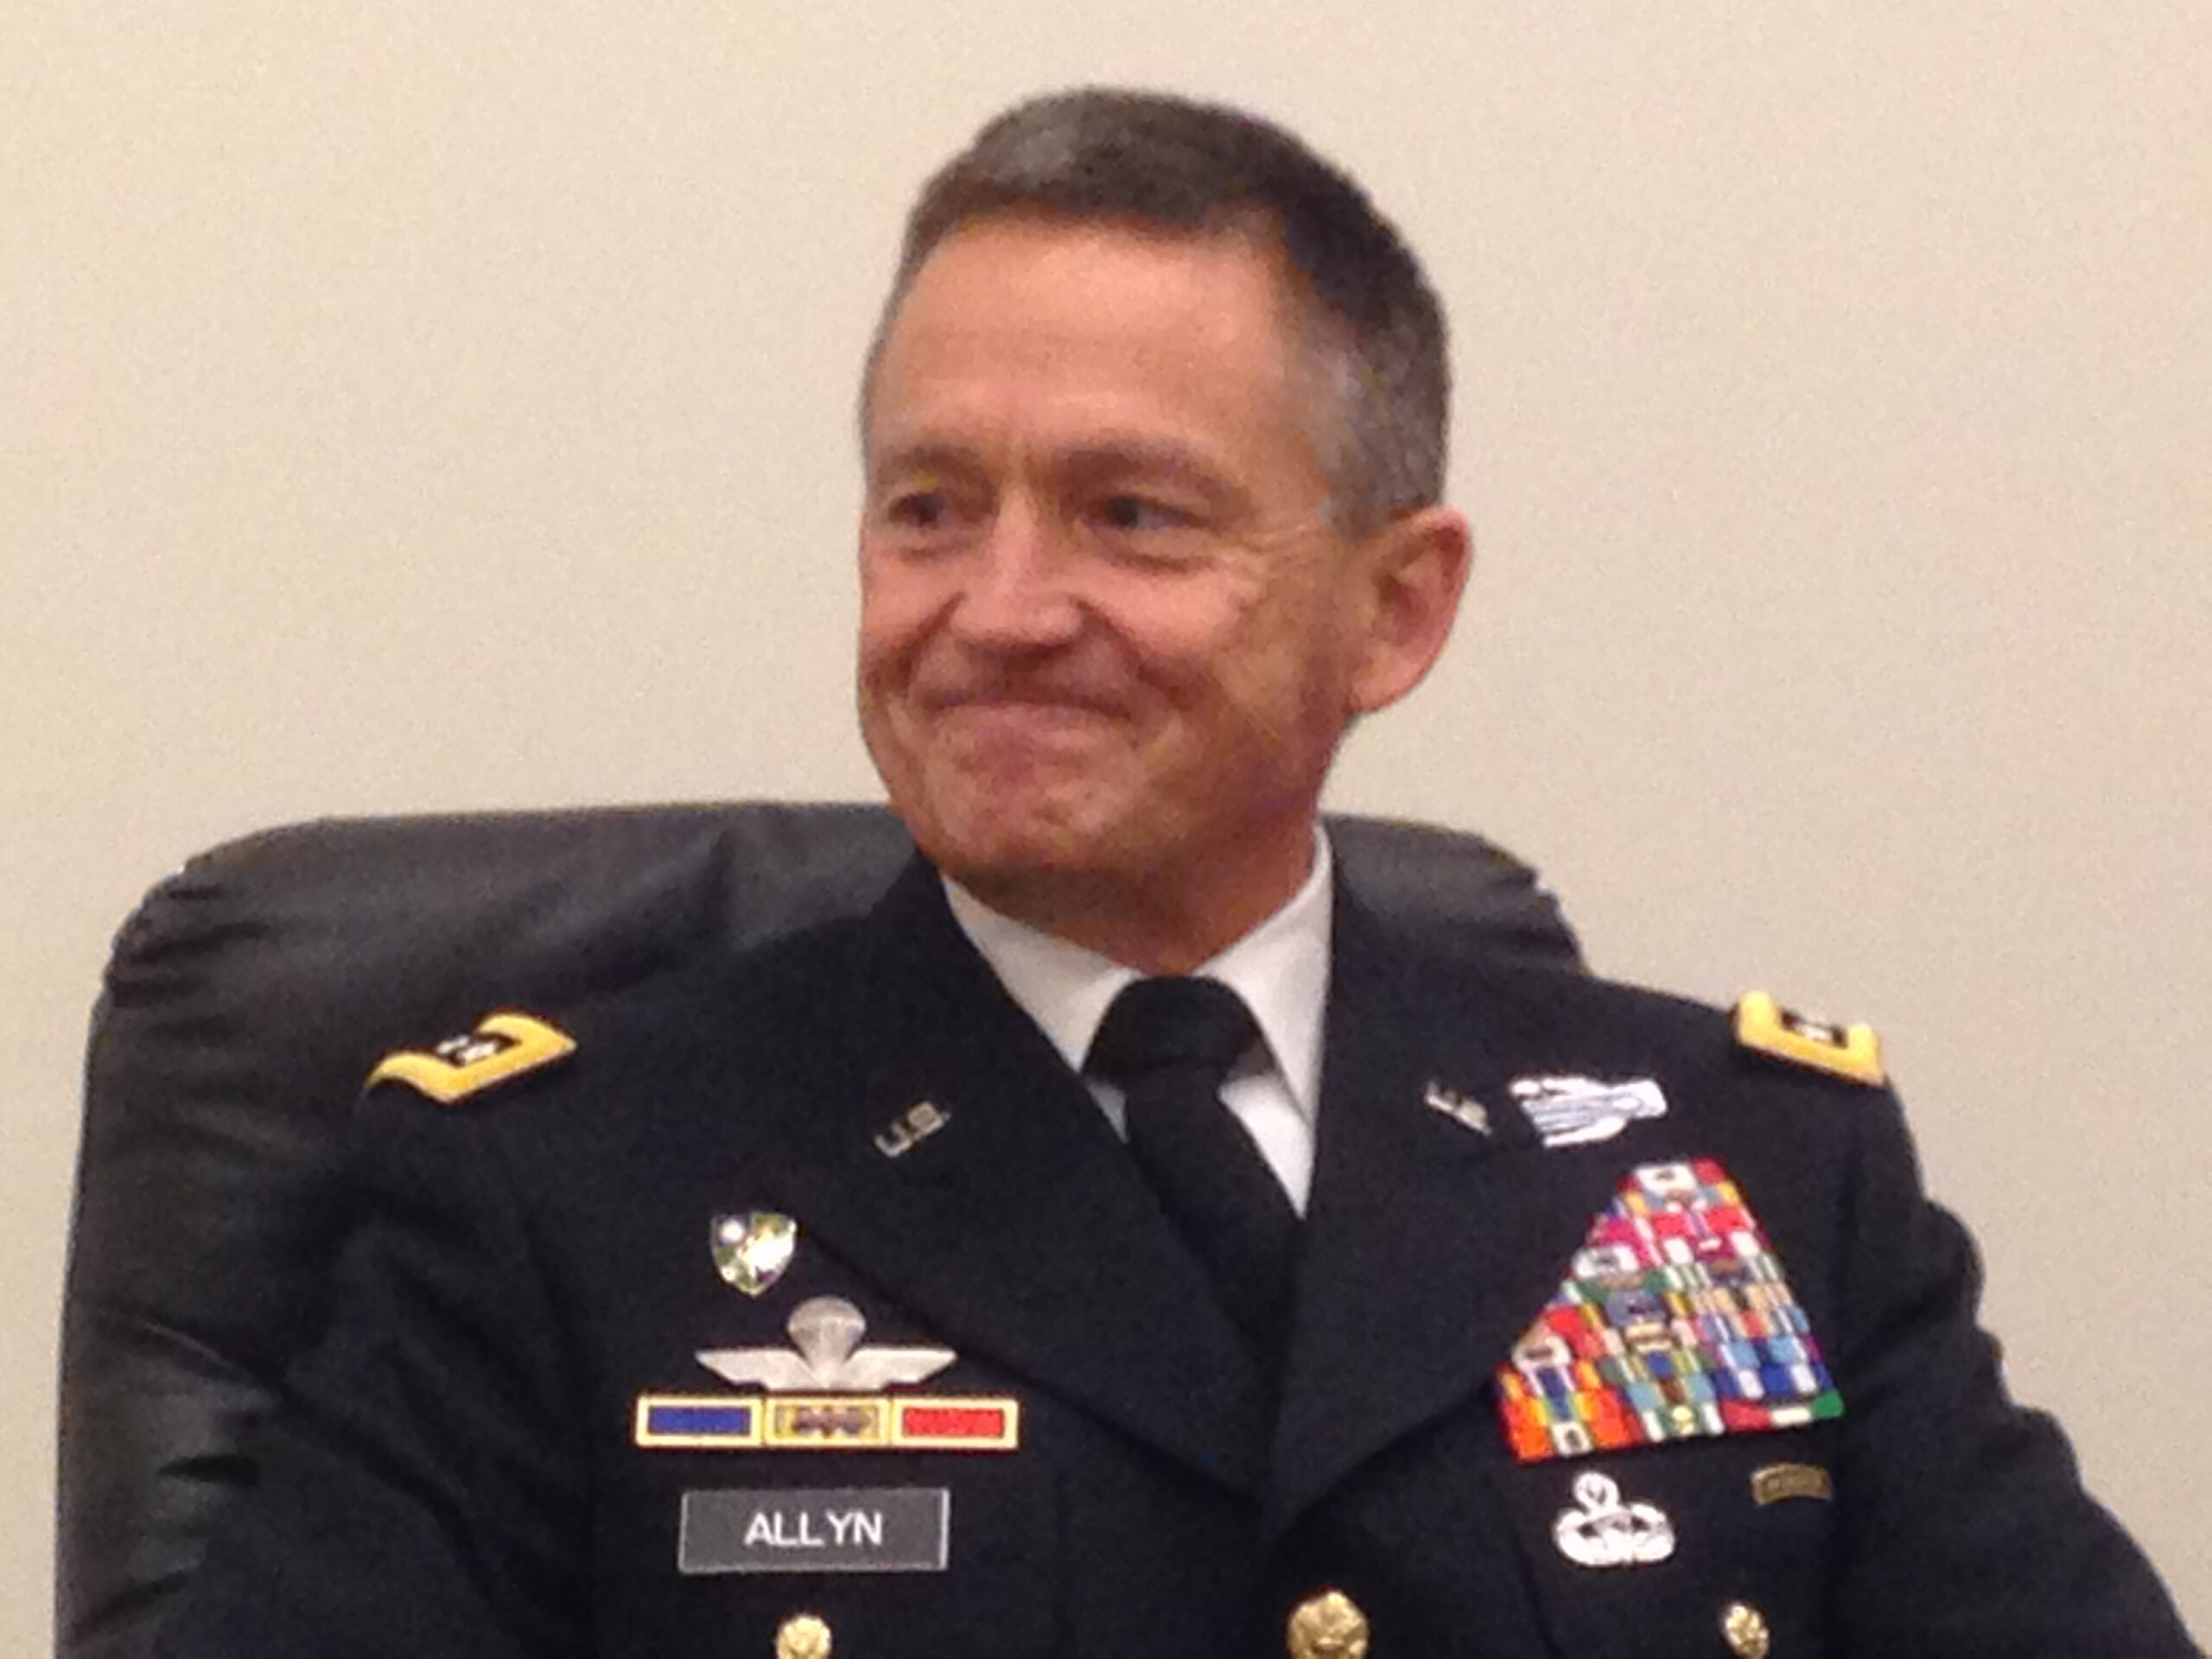 ‘There Is No Peace Dividend’: Army Vice Chief Rails Against Sequester